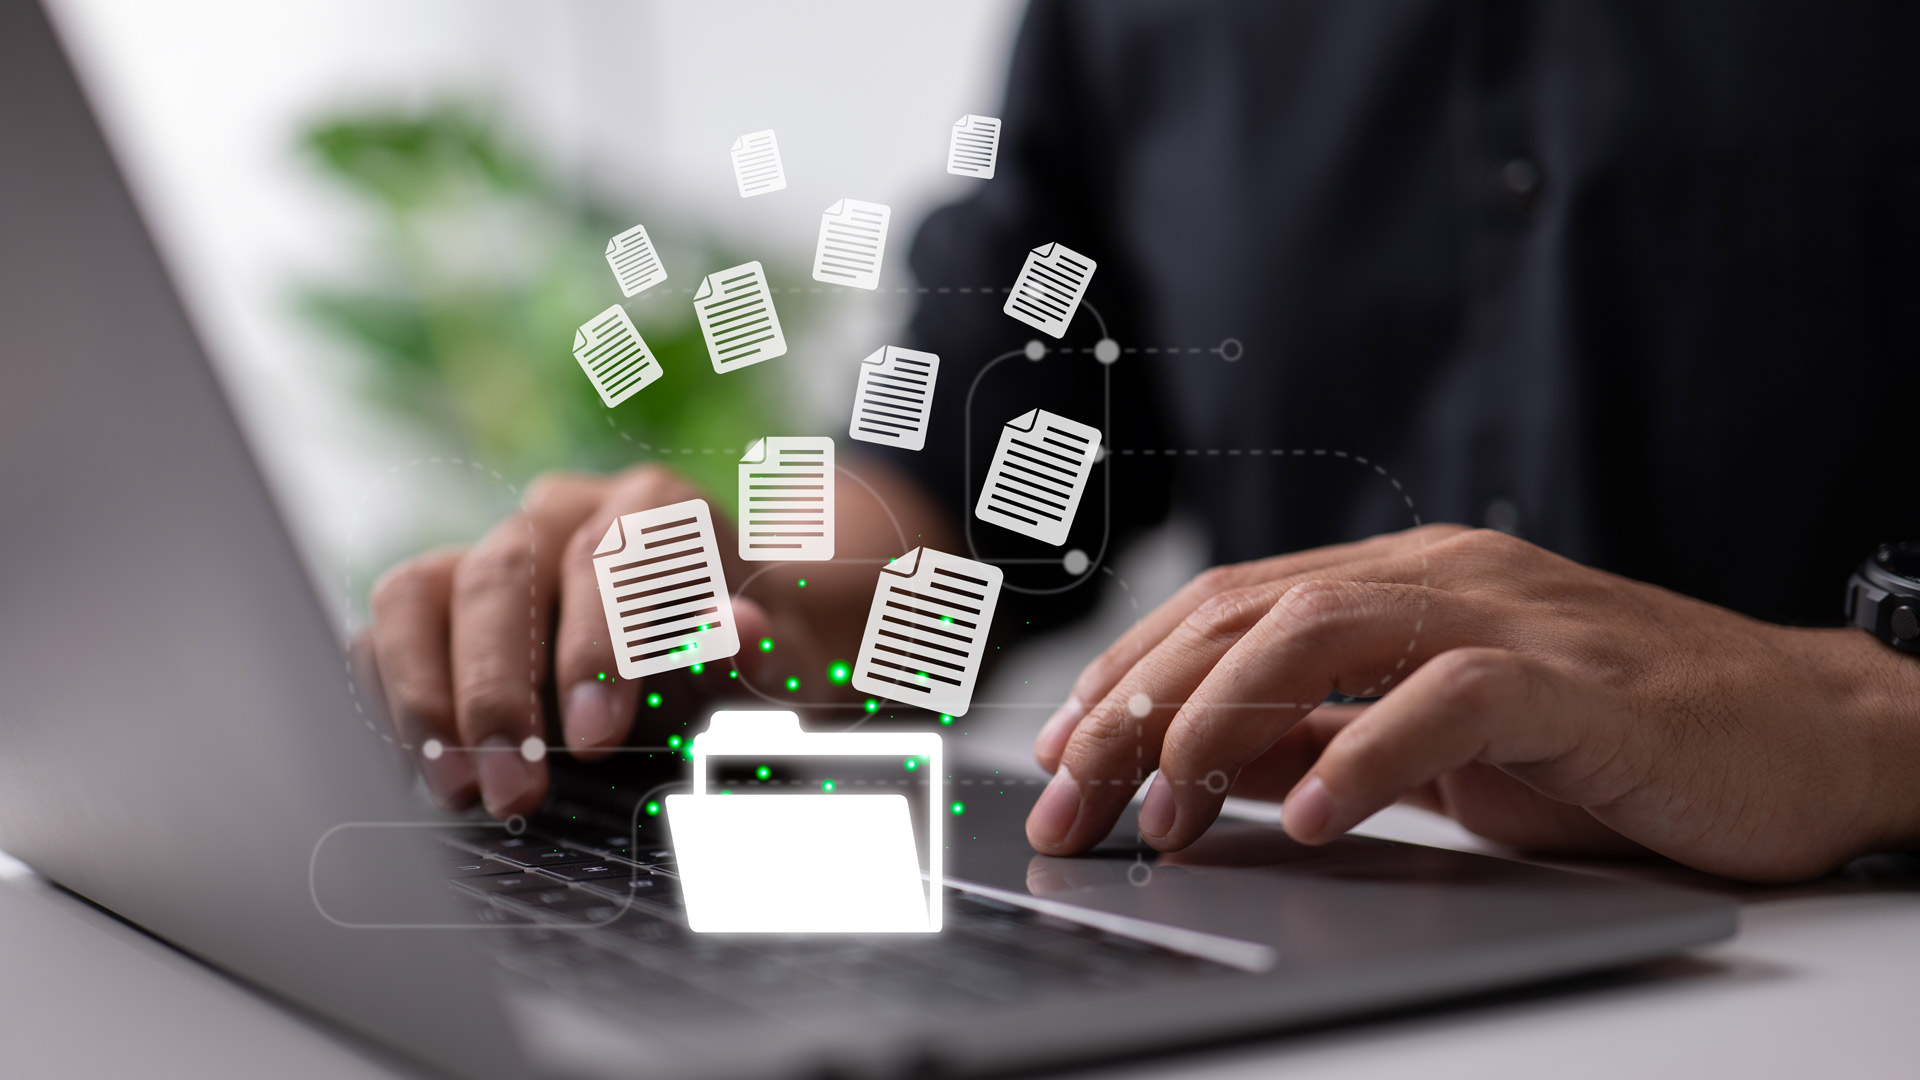 Empowering Organizations with Intelligent Document Recognition